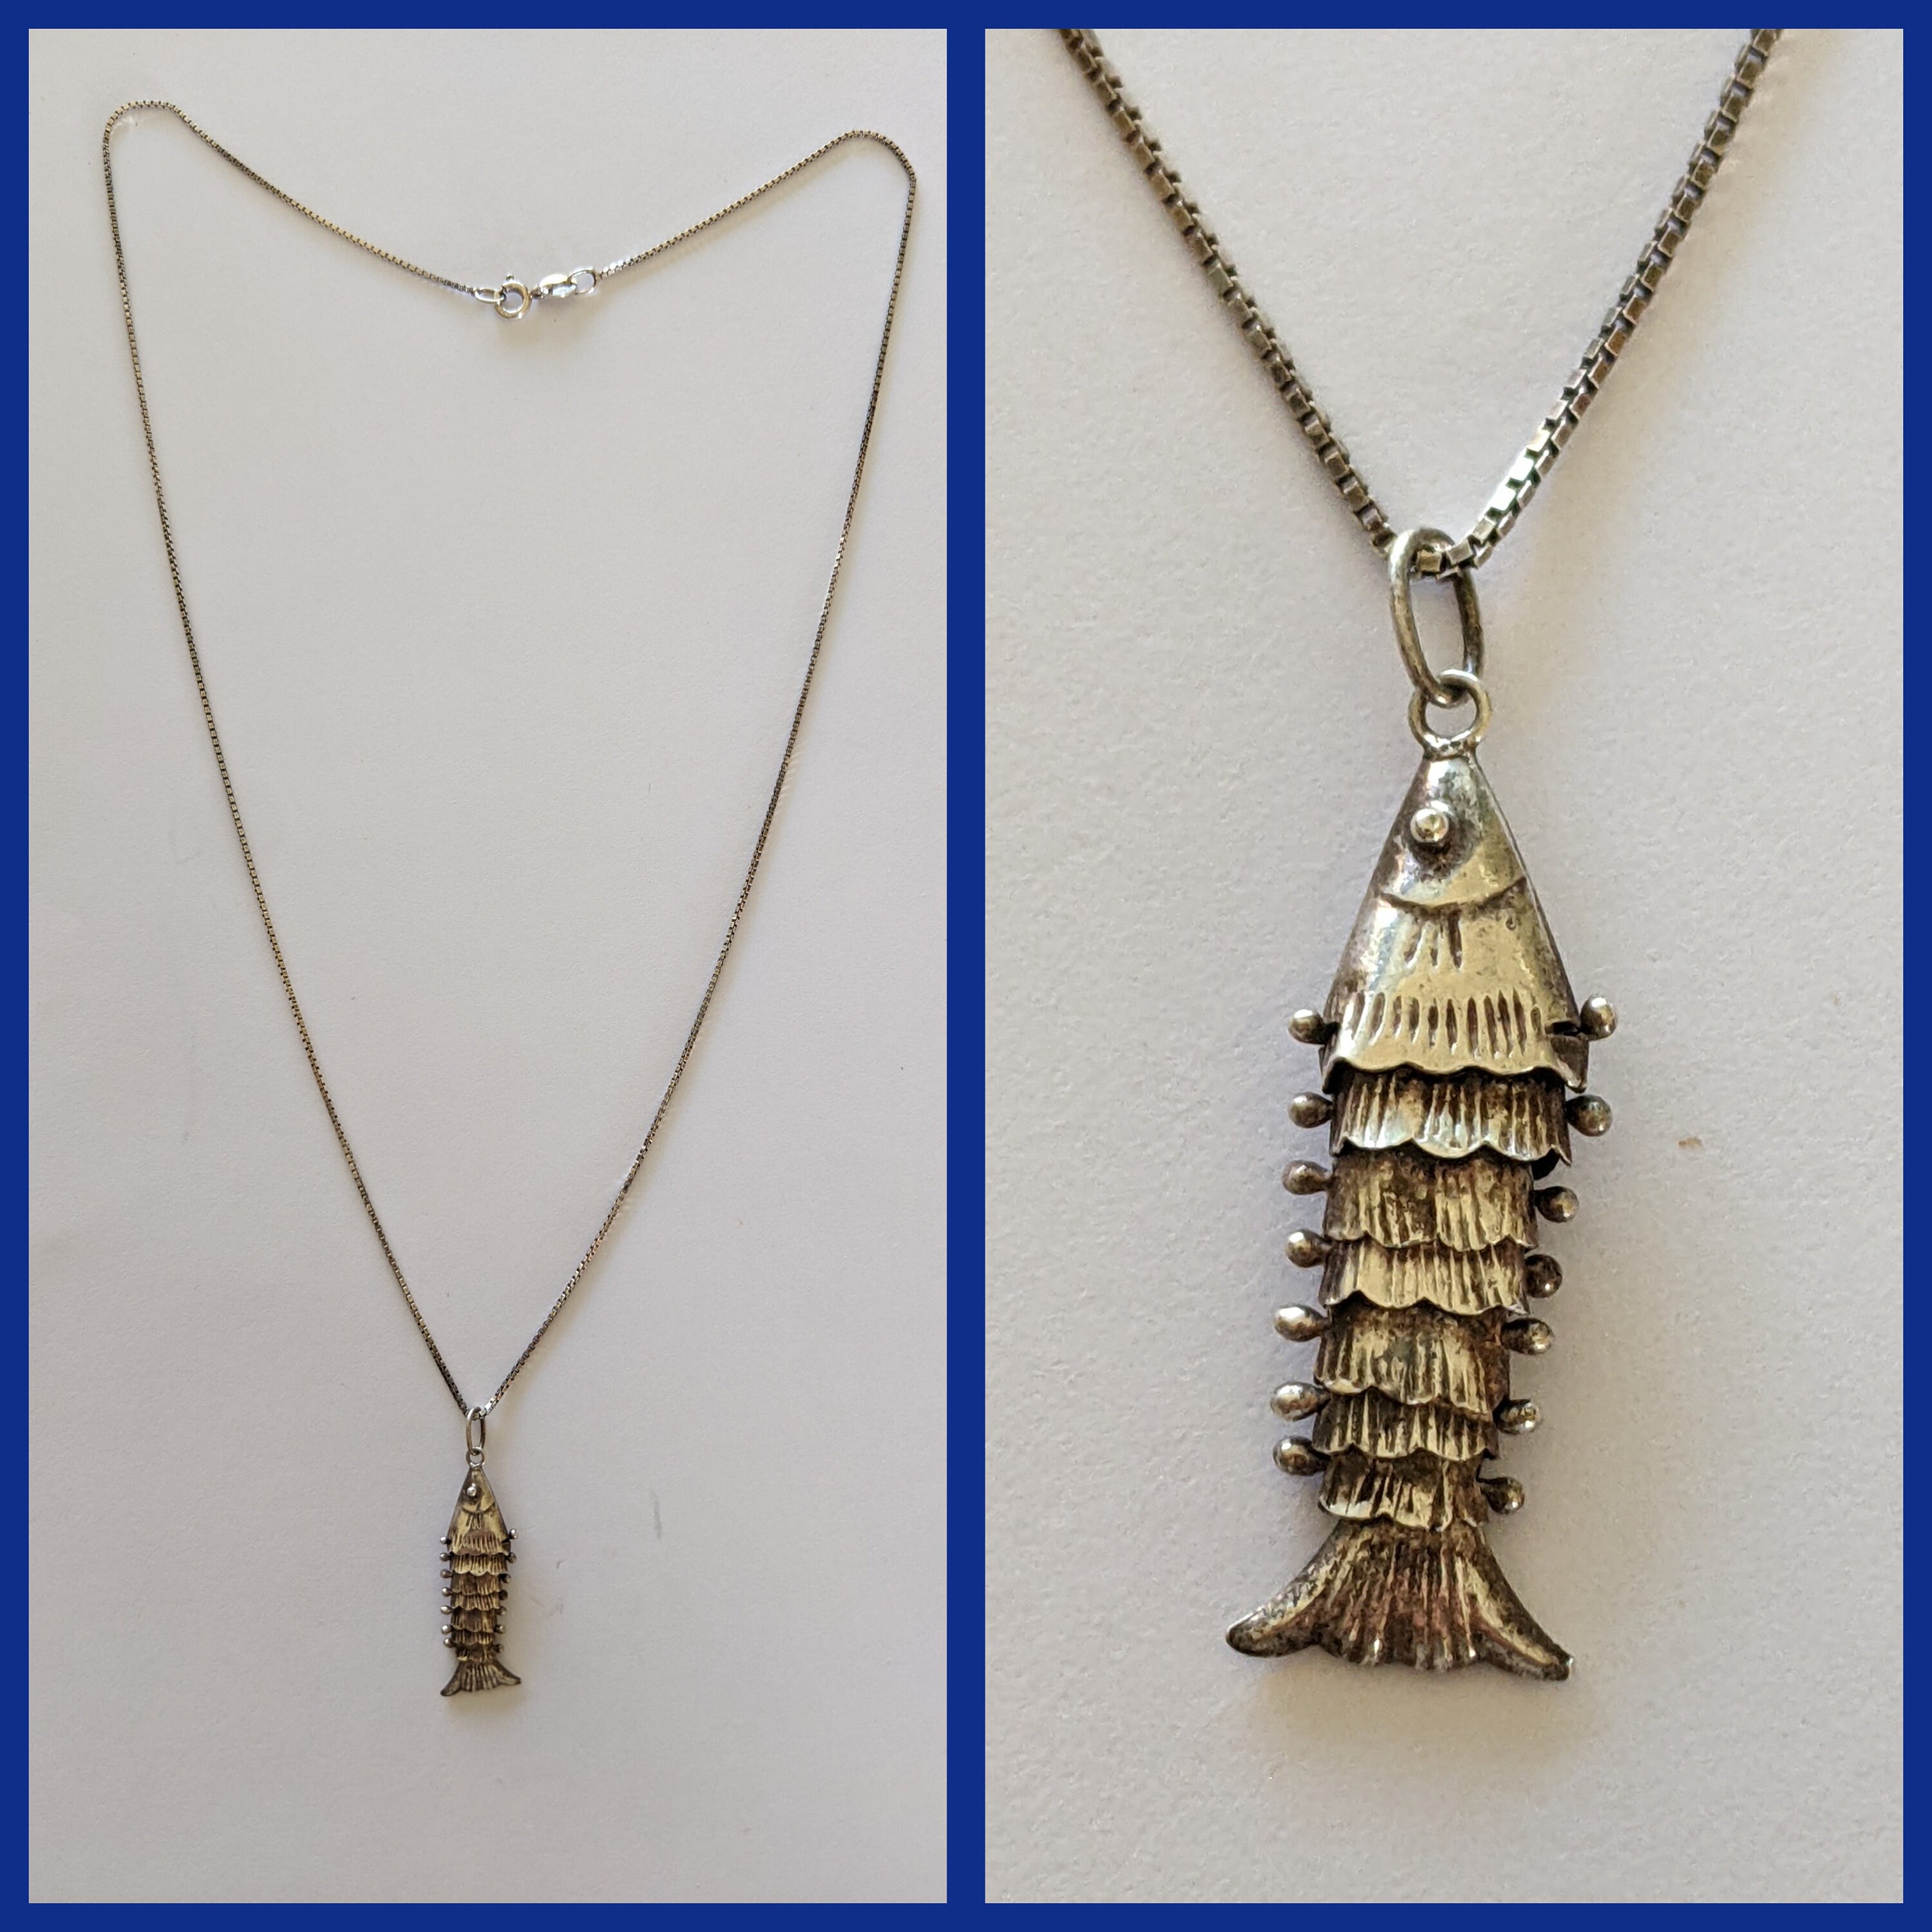 Silver Articulated Fish Necklace